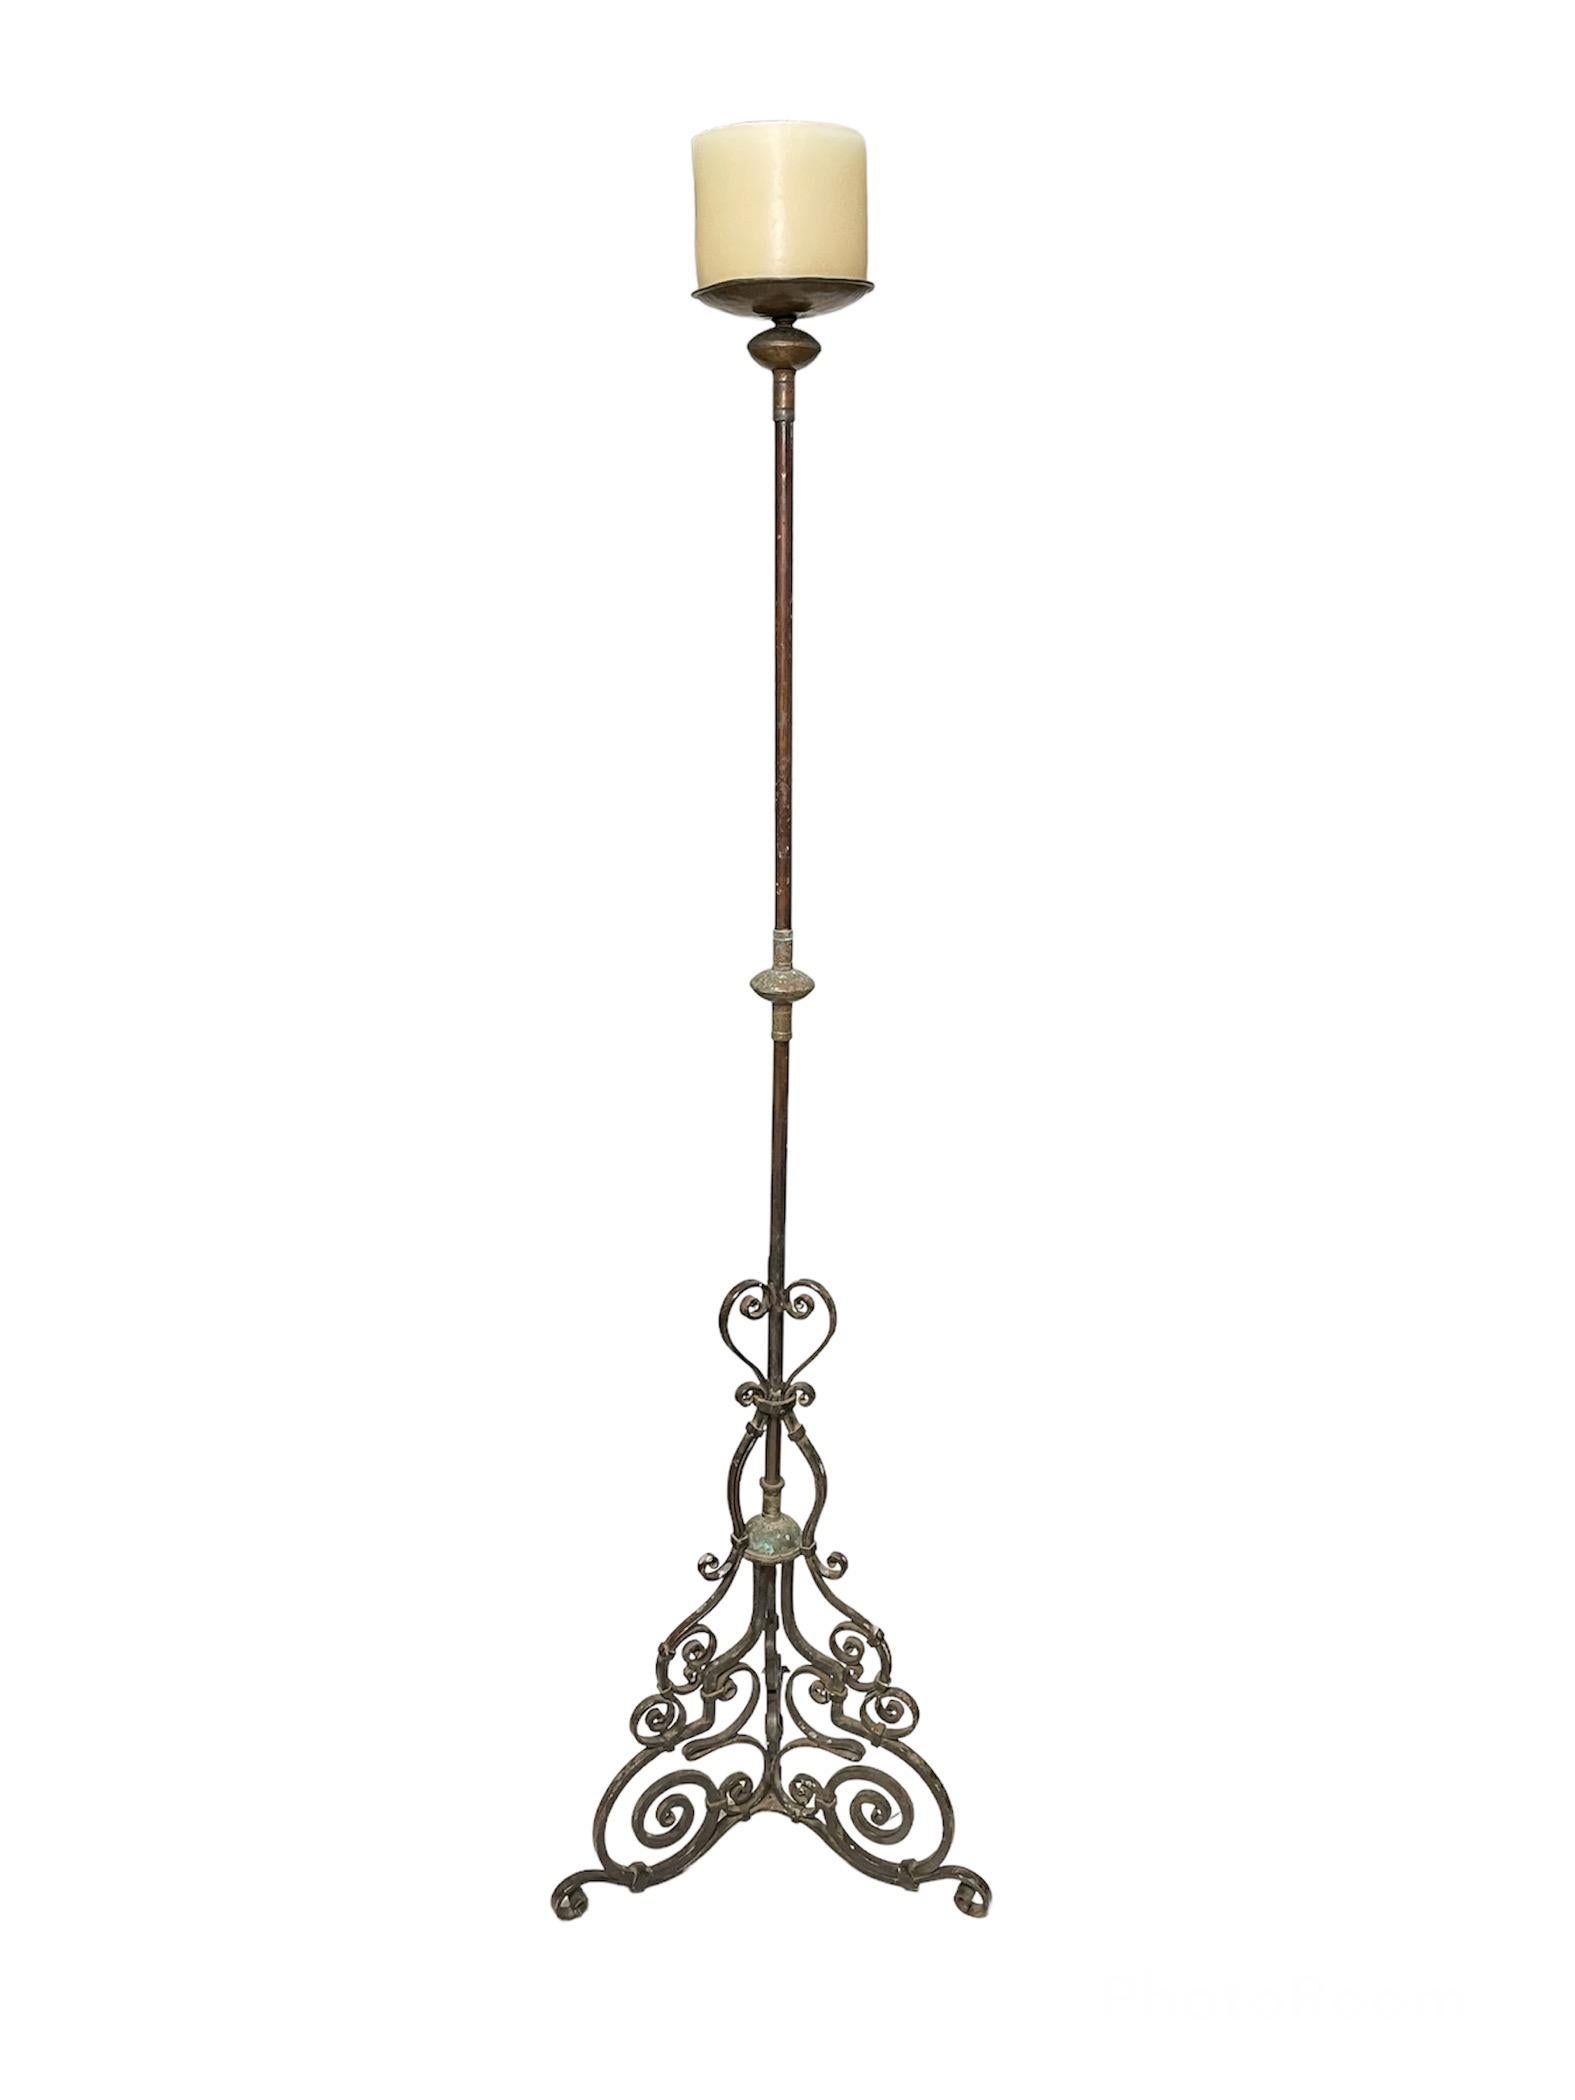 Gothic Style Wrought Iron Candle holder/Torchere For Sale 10